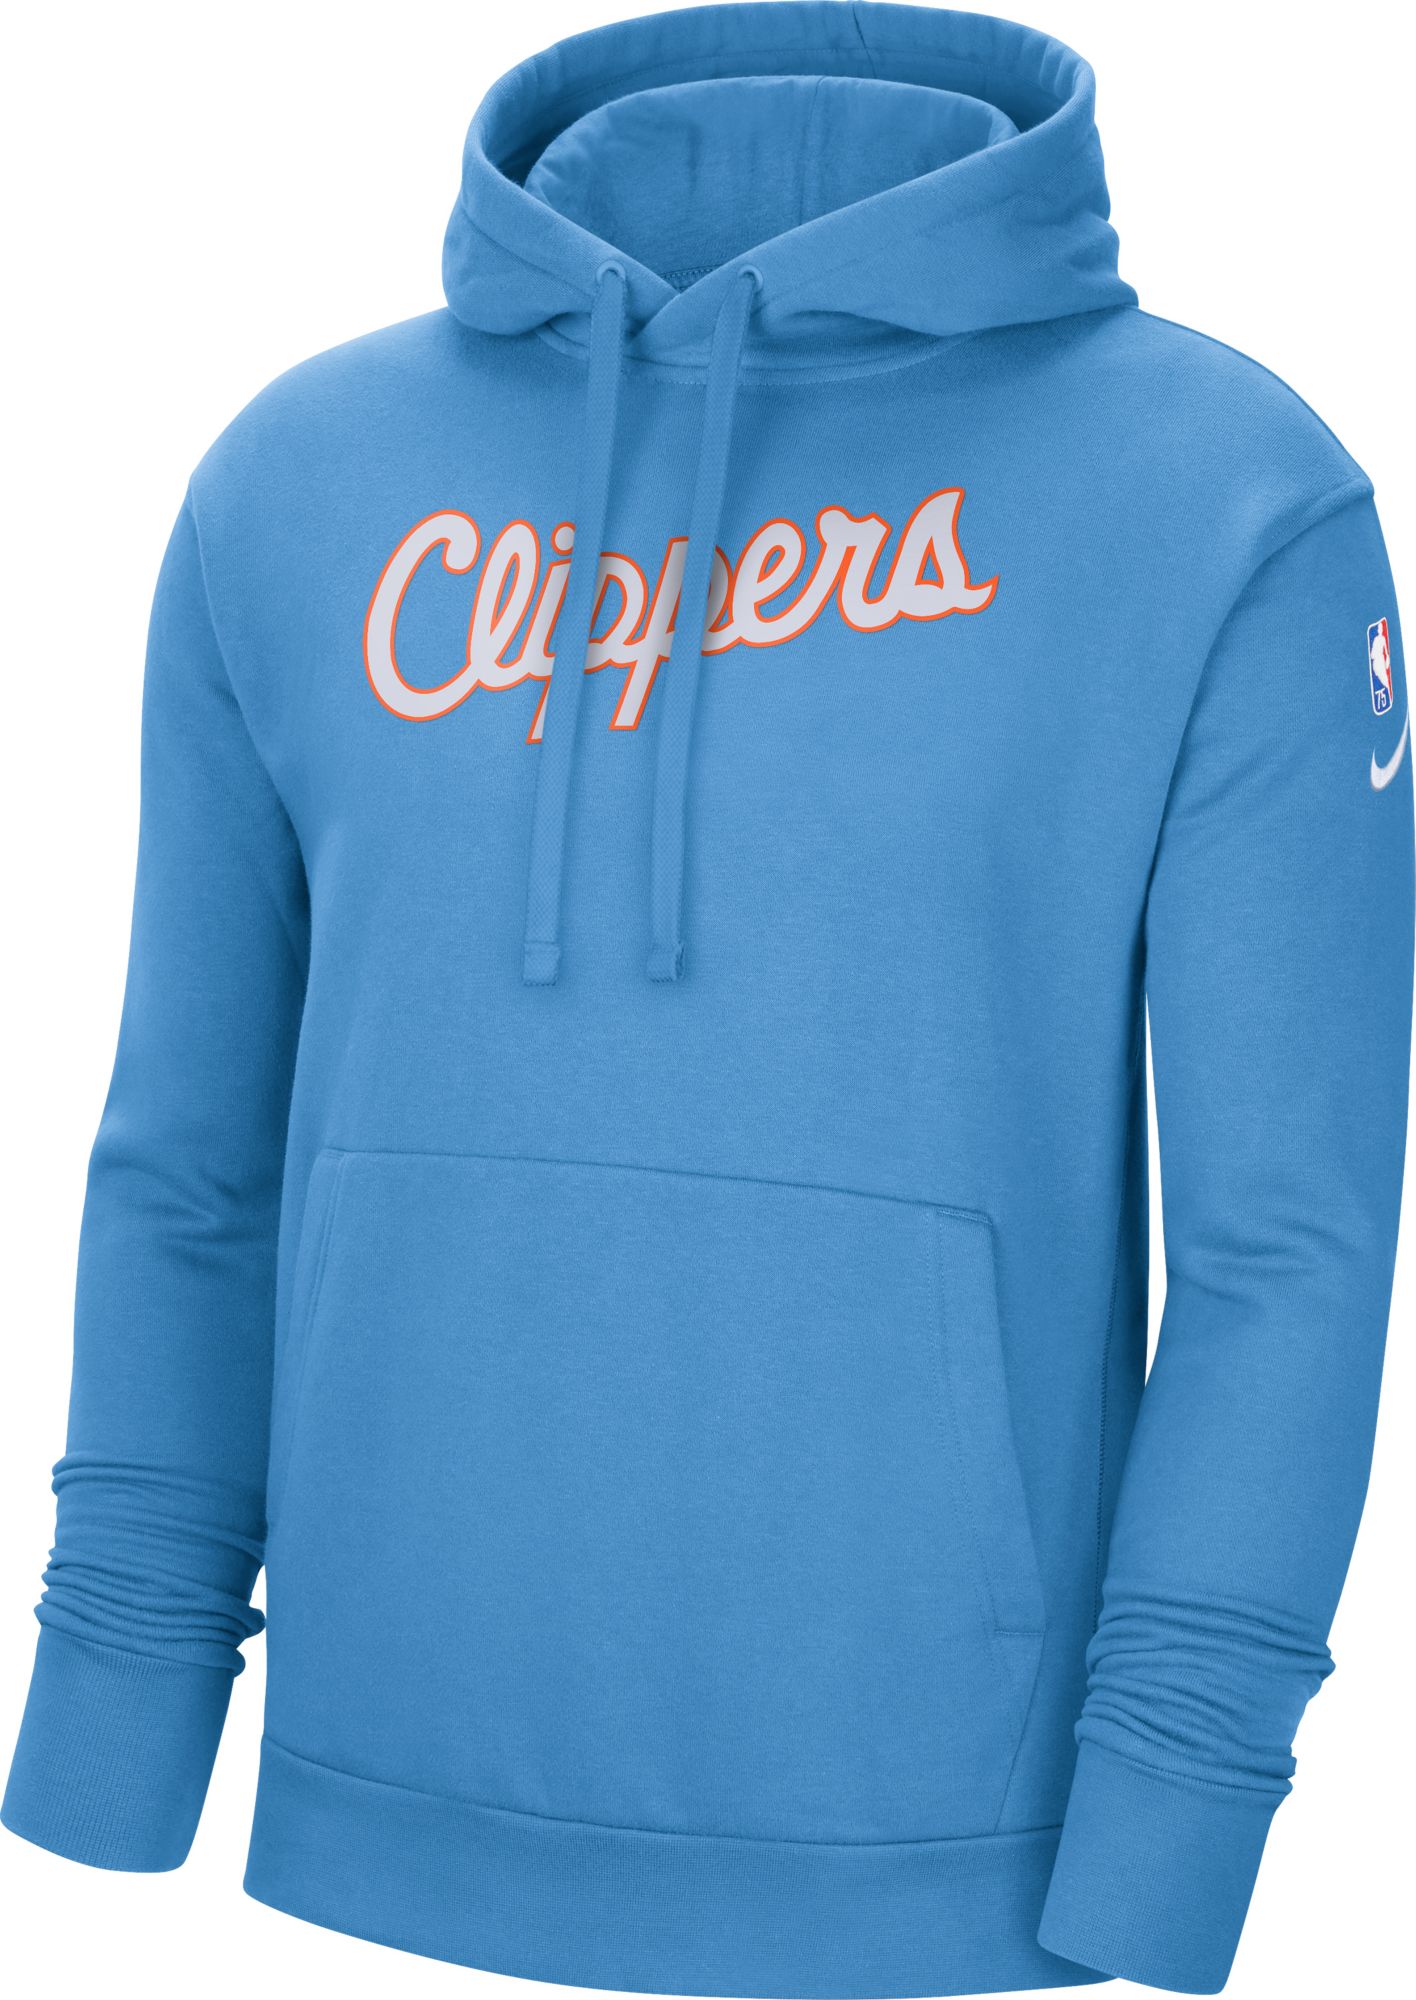 Los Angeles Clippers Nike Golf Dri-Fit Polo Men's Light Blue New S